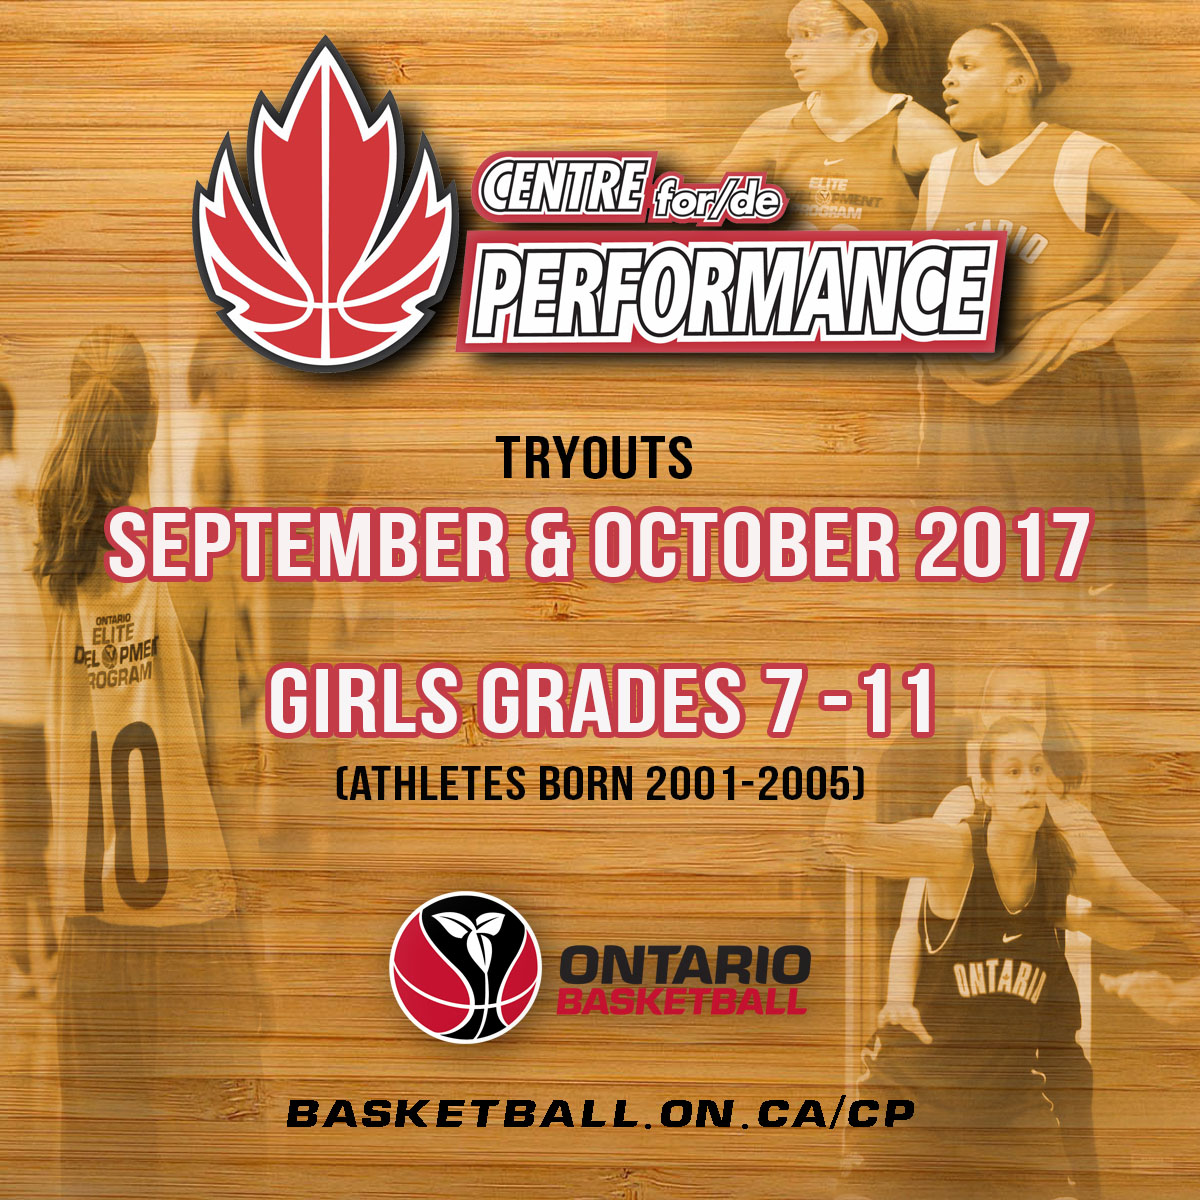 Ontario Basketball Centre for Performance Girls Tryouts 2017